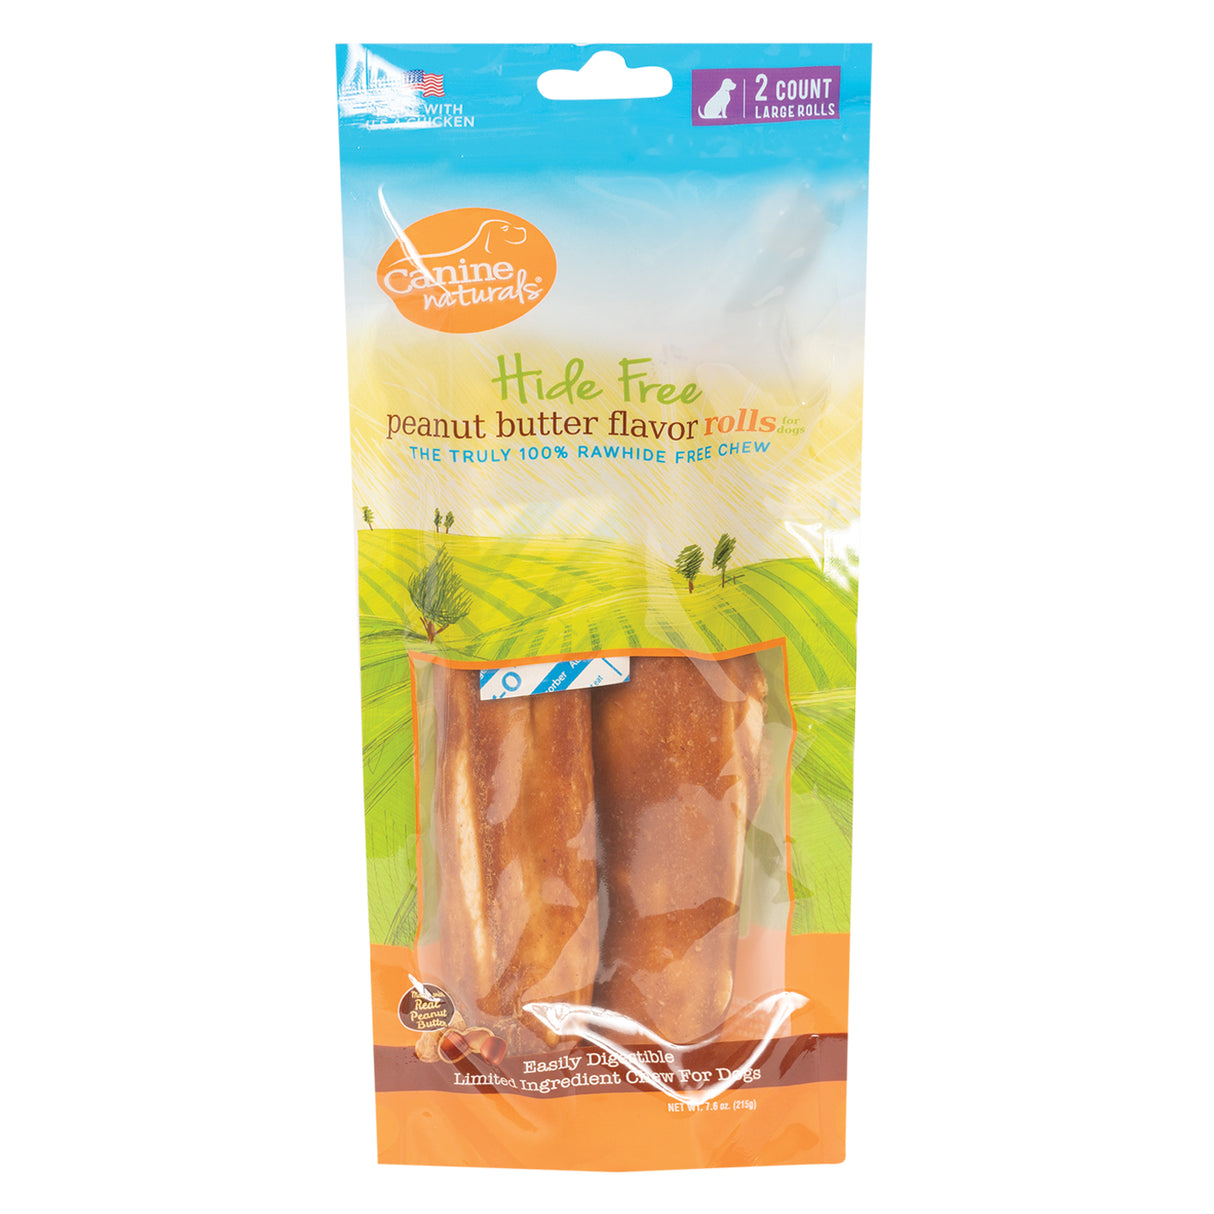 Canine Naturals Rawhide Free Peanut Butter Flavour Rolls 7 in. - 2 Pack Dog Treat